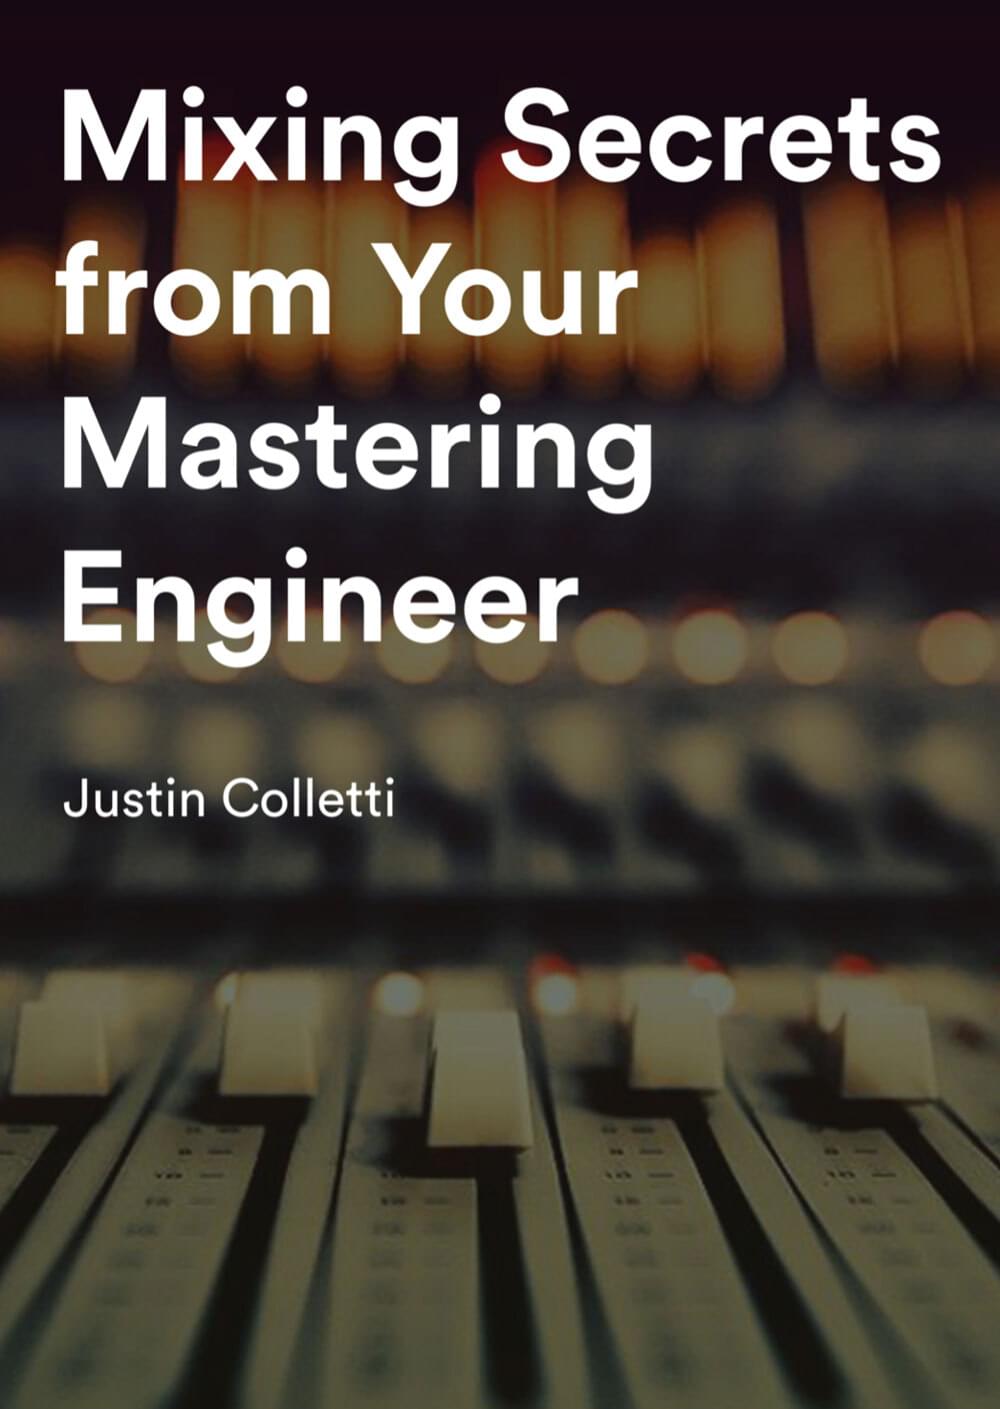 Mixing Secrets from your Mastering Engineer eBook